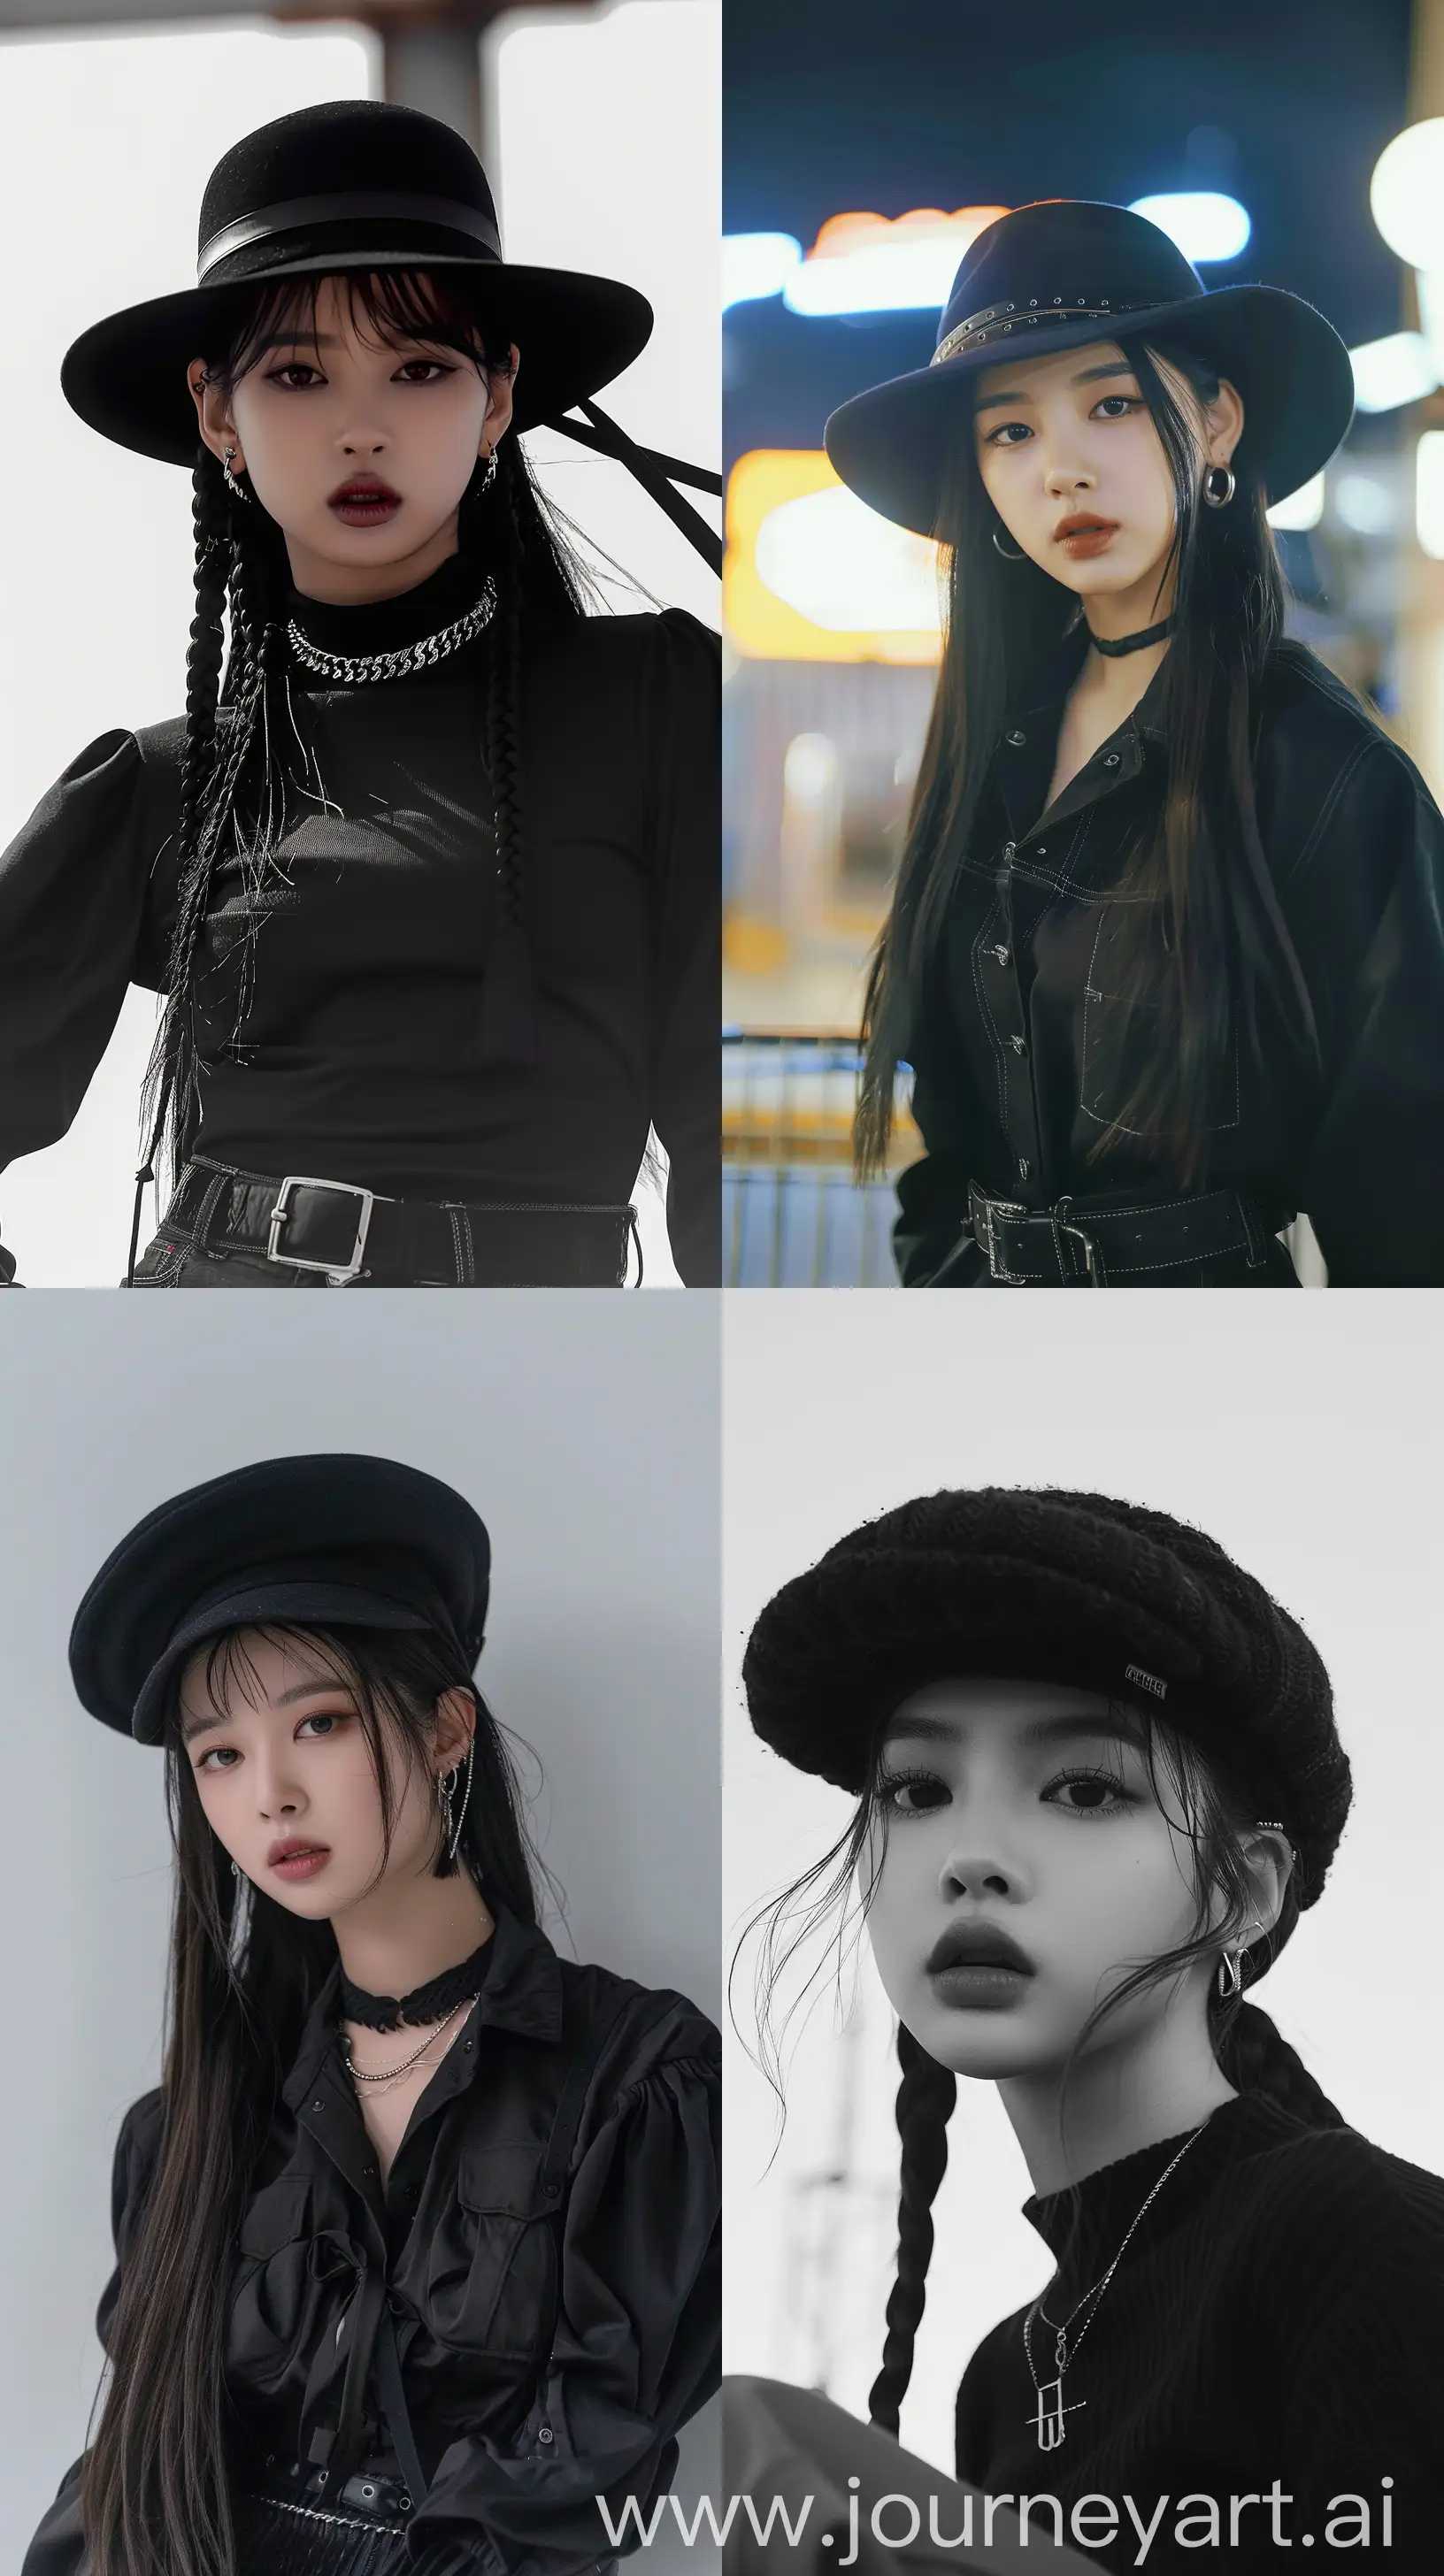 Stylish-Blackpinks-Jennie-in-Cute-Black-Outfit-with-Flat-Hat